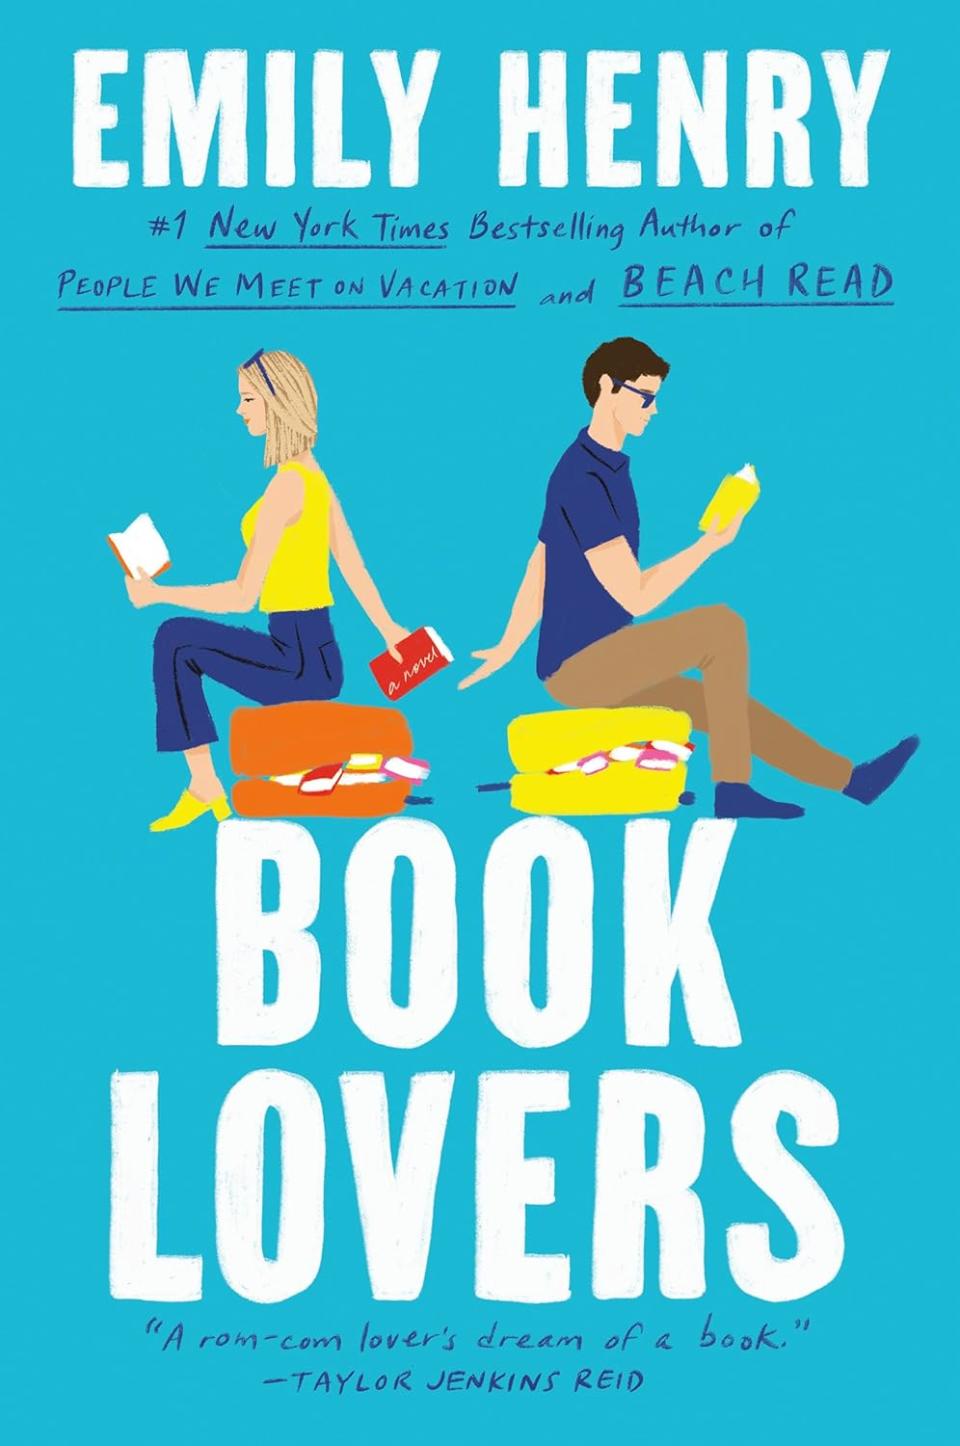 Book Lovers by Emily Henry (books about books) 